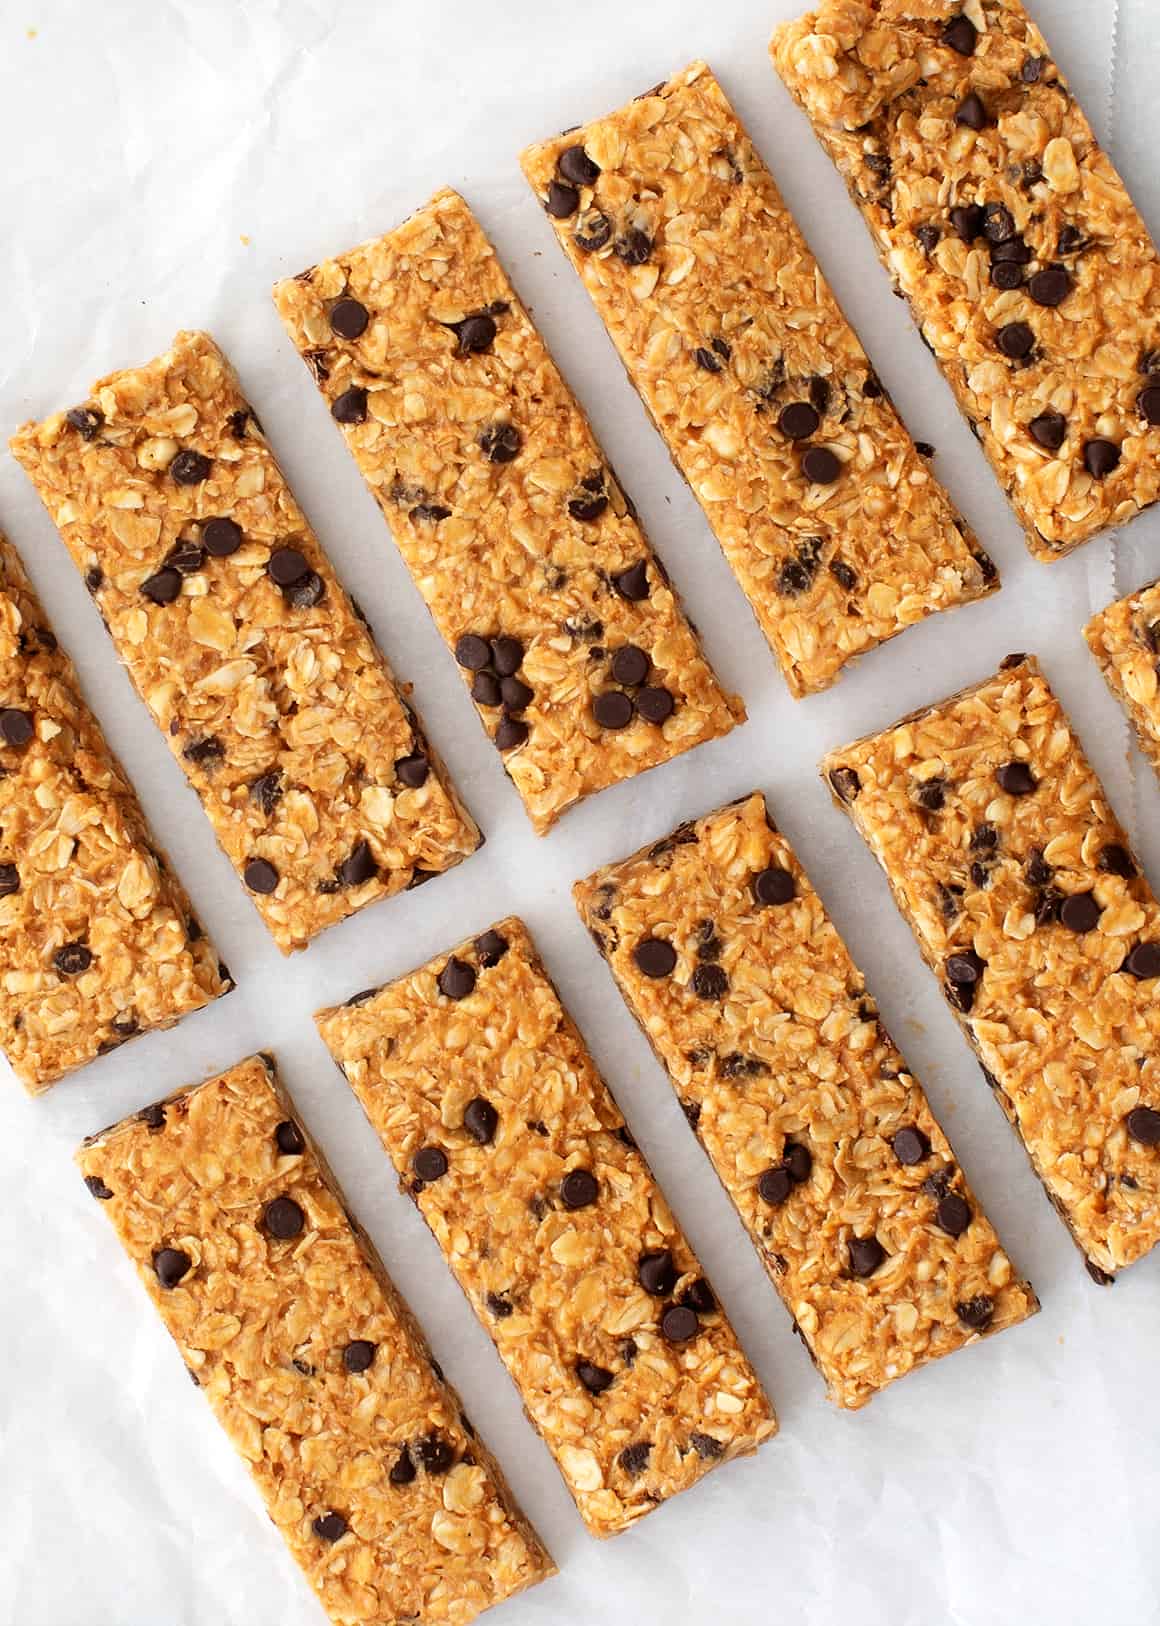 easy homemade granola bars recipe delicious and nutritious snack for on the go